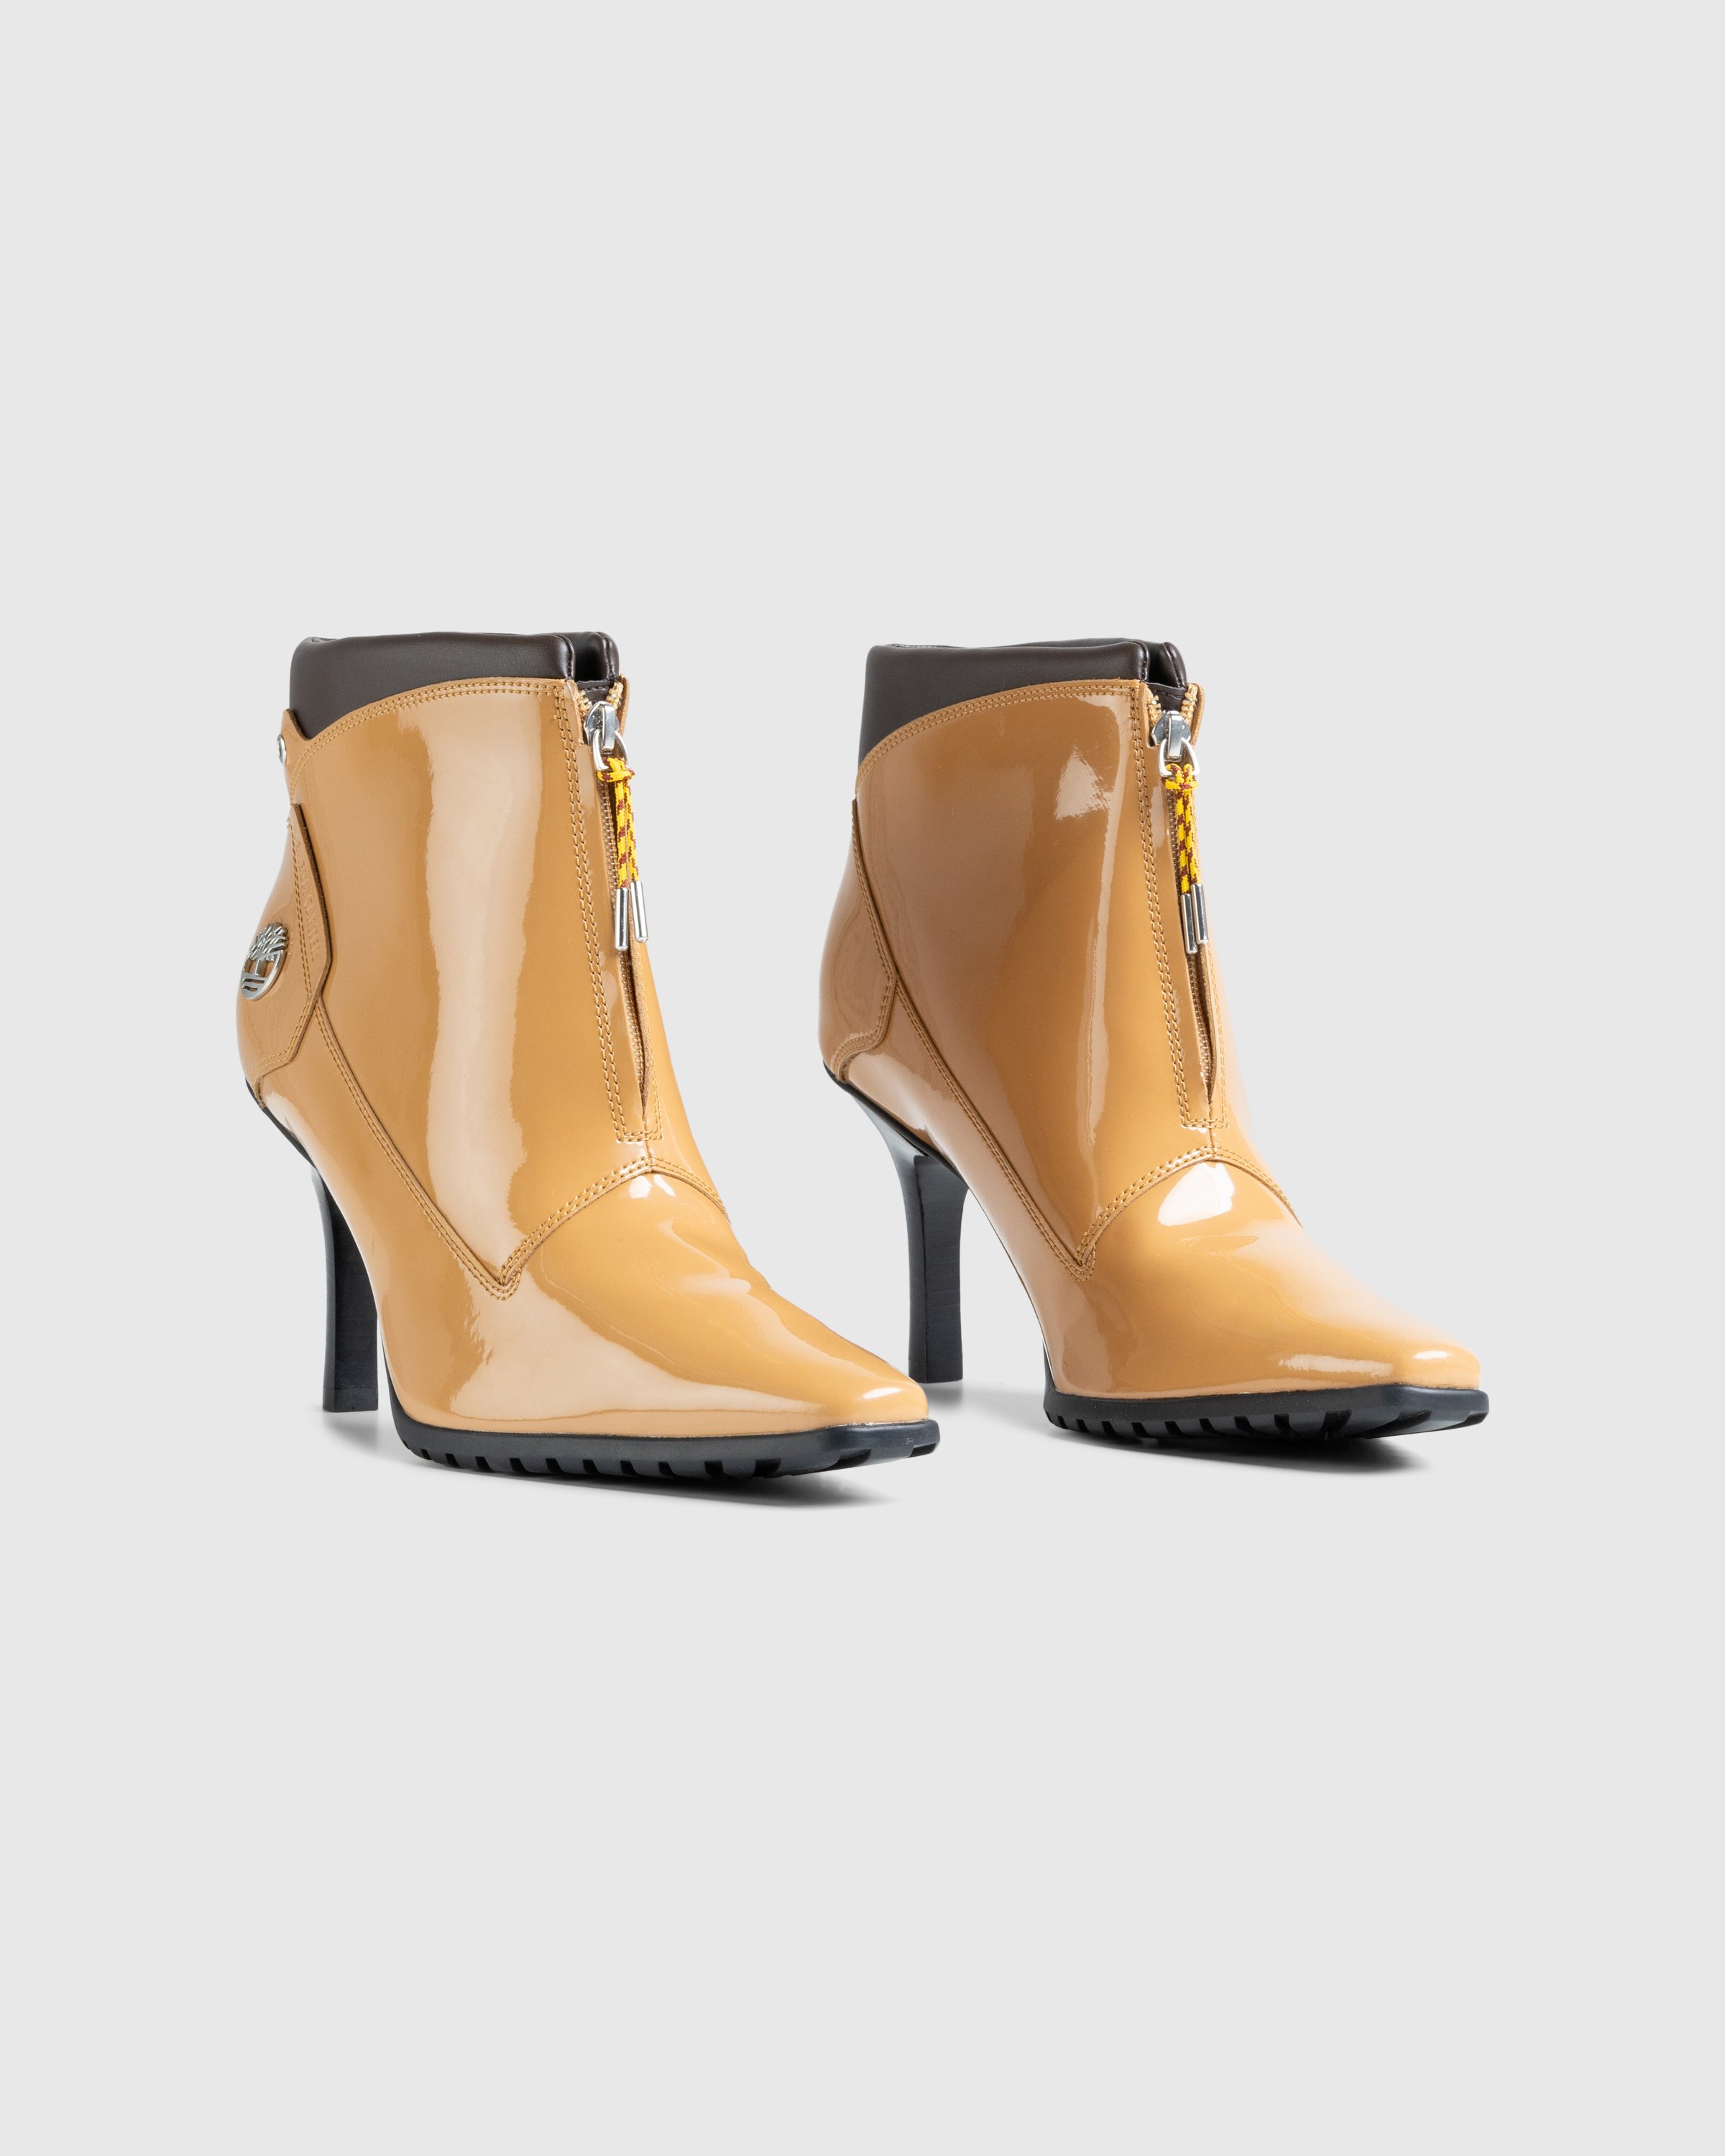 Veneda Carter x Timberland - MID ZIP UP BOOT WHEAT PATENT LEATHER - Footwear - Brown - Image 3